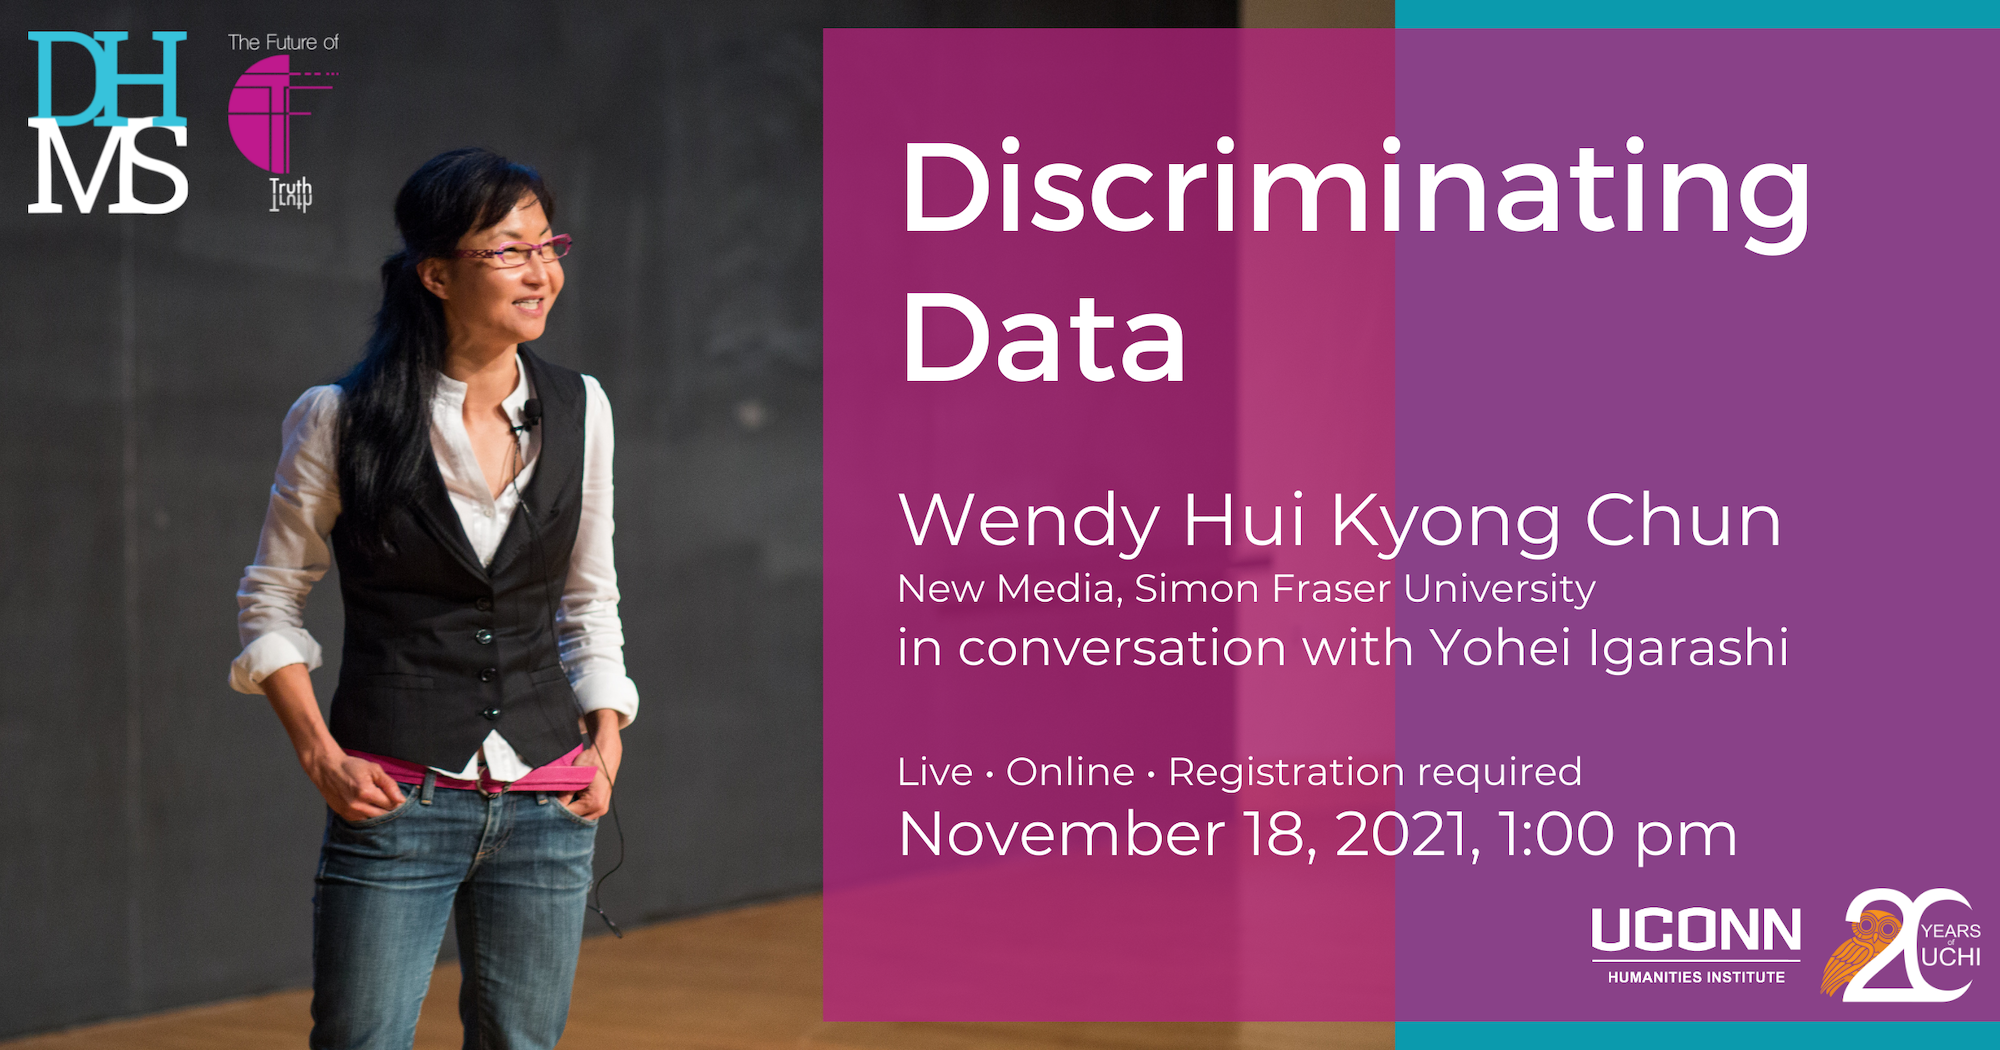 Discriminating Data. Wendy Hui Kyong Chun (New Media, Simon Fraser University) in conversation with Yohei Igarashi. Live. Online. Registration required. November 18, 2021, 1:00pm.